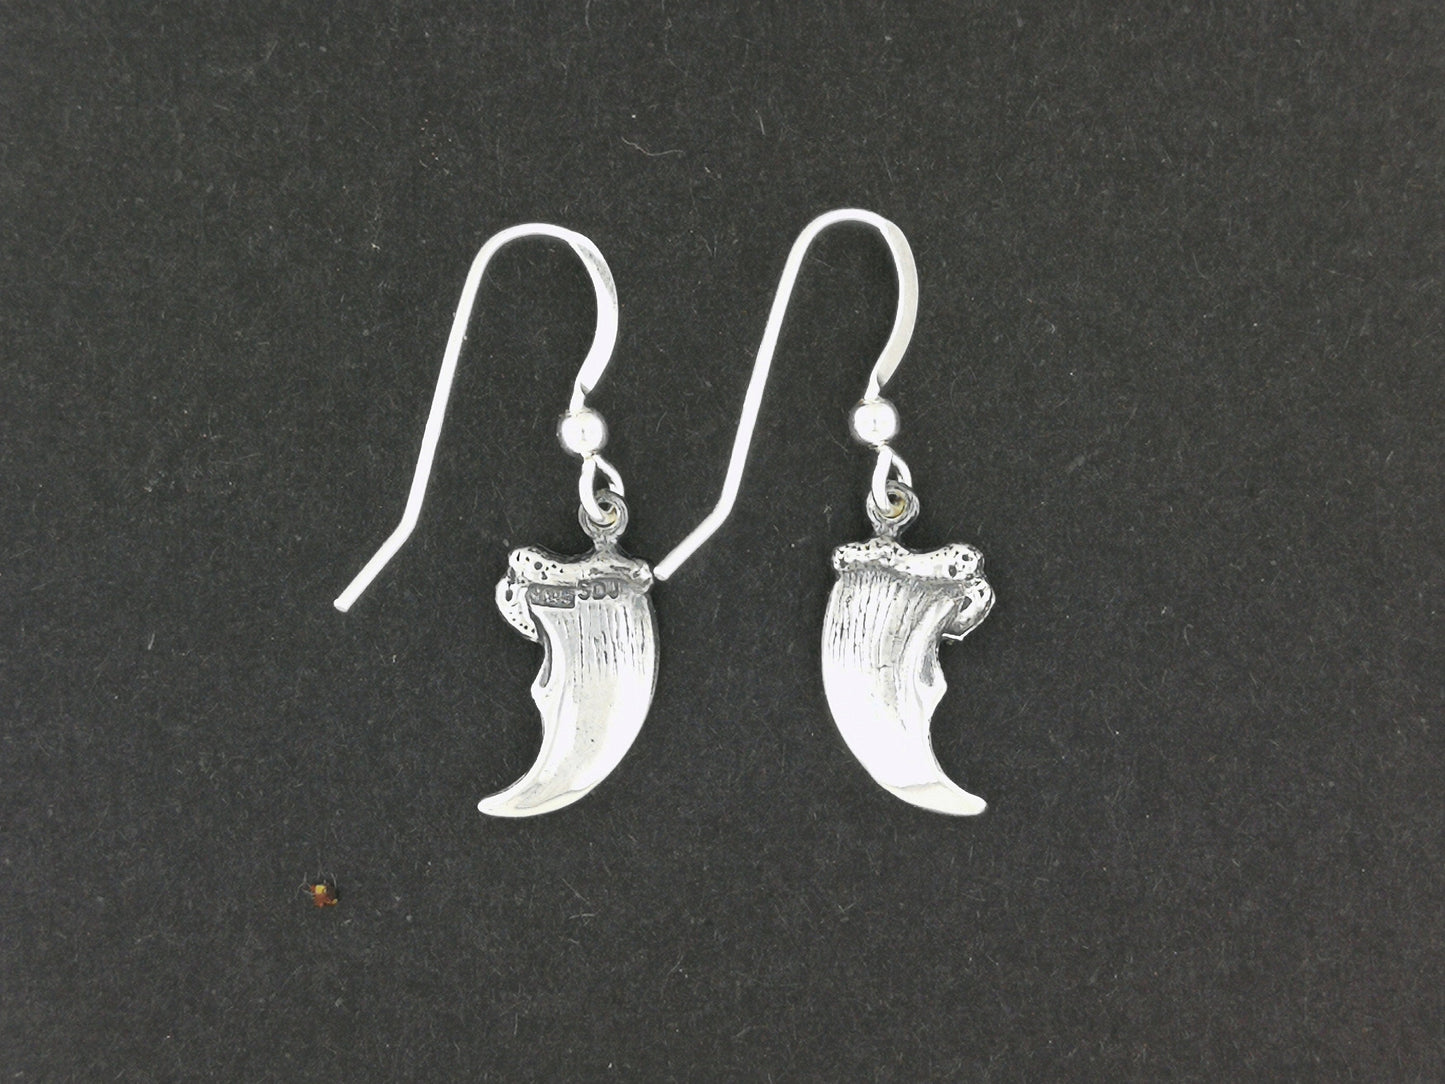 Bear Claw Earrings in Sterling Silver or Antique Bronze